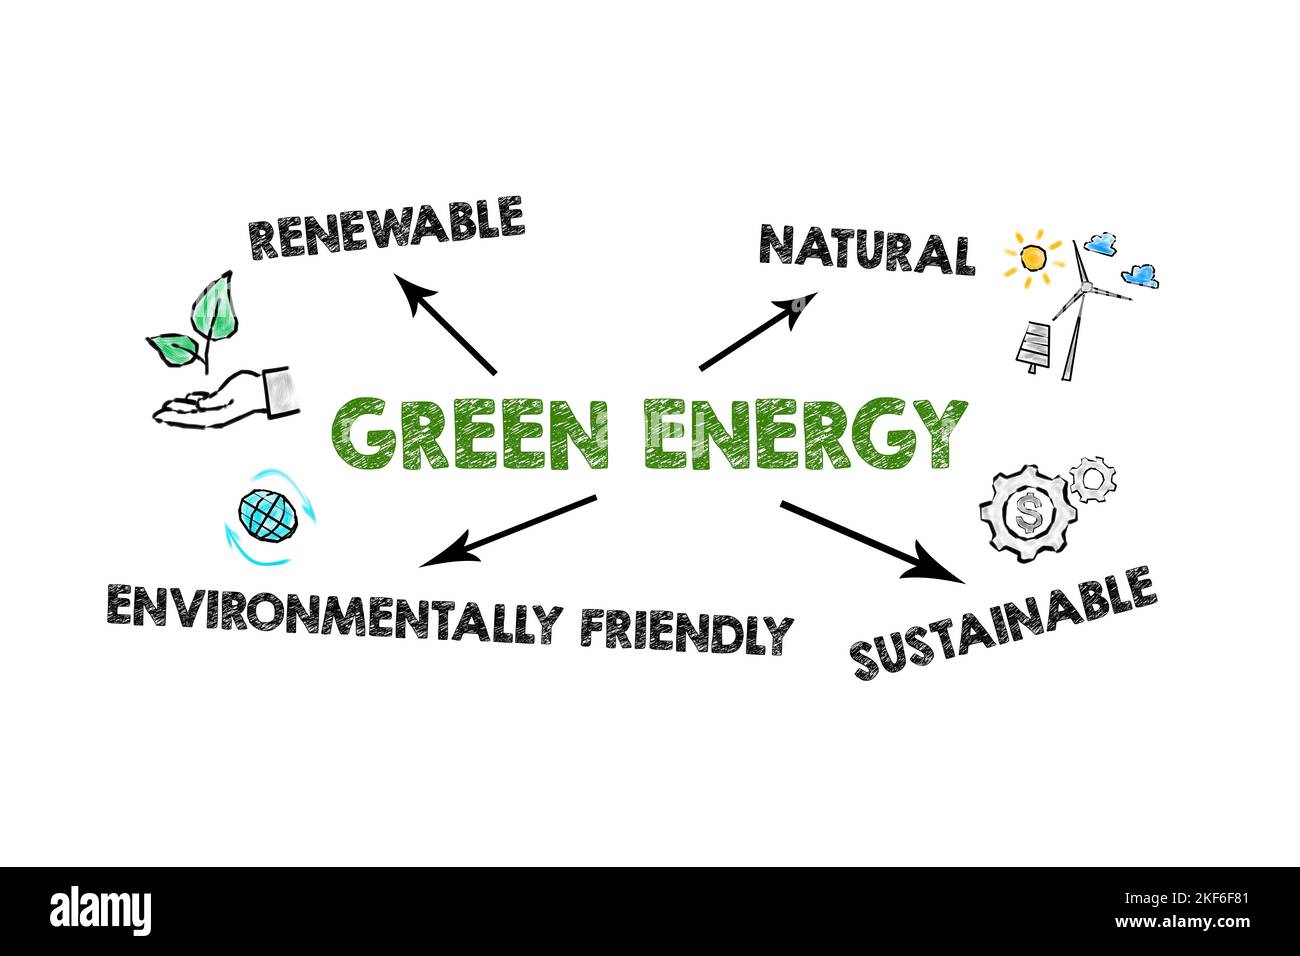 Green Energy. Illustration with icons keywords directions arrows on white background. Stock Photo